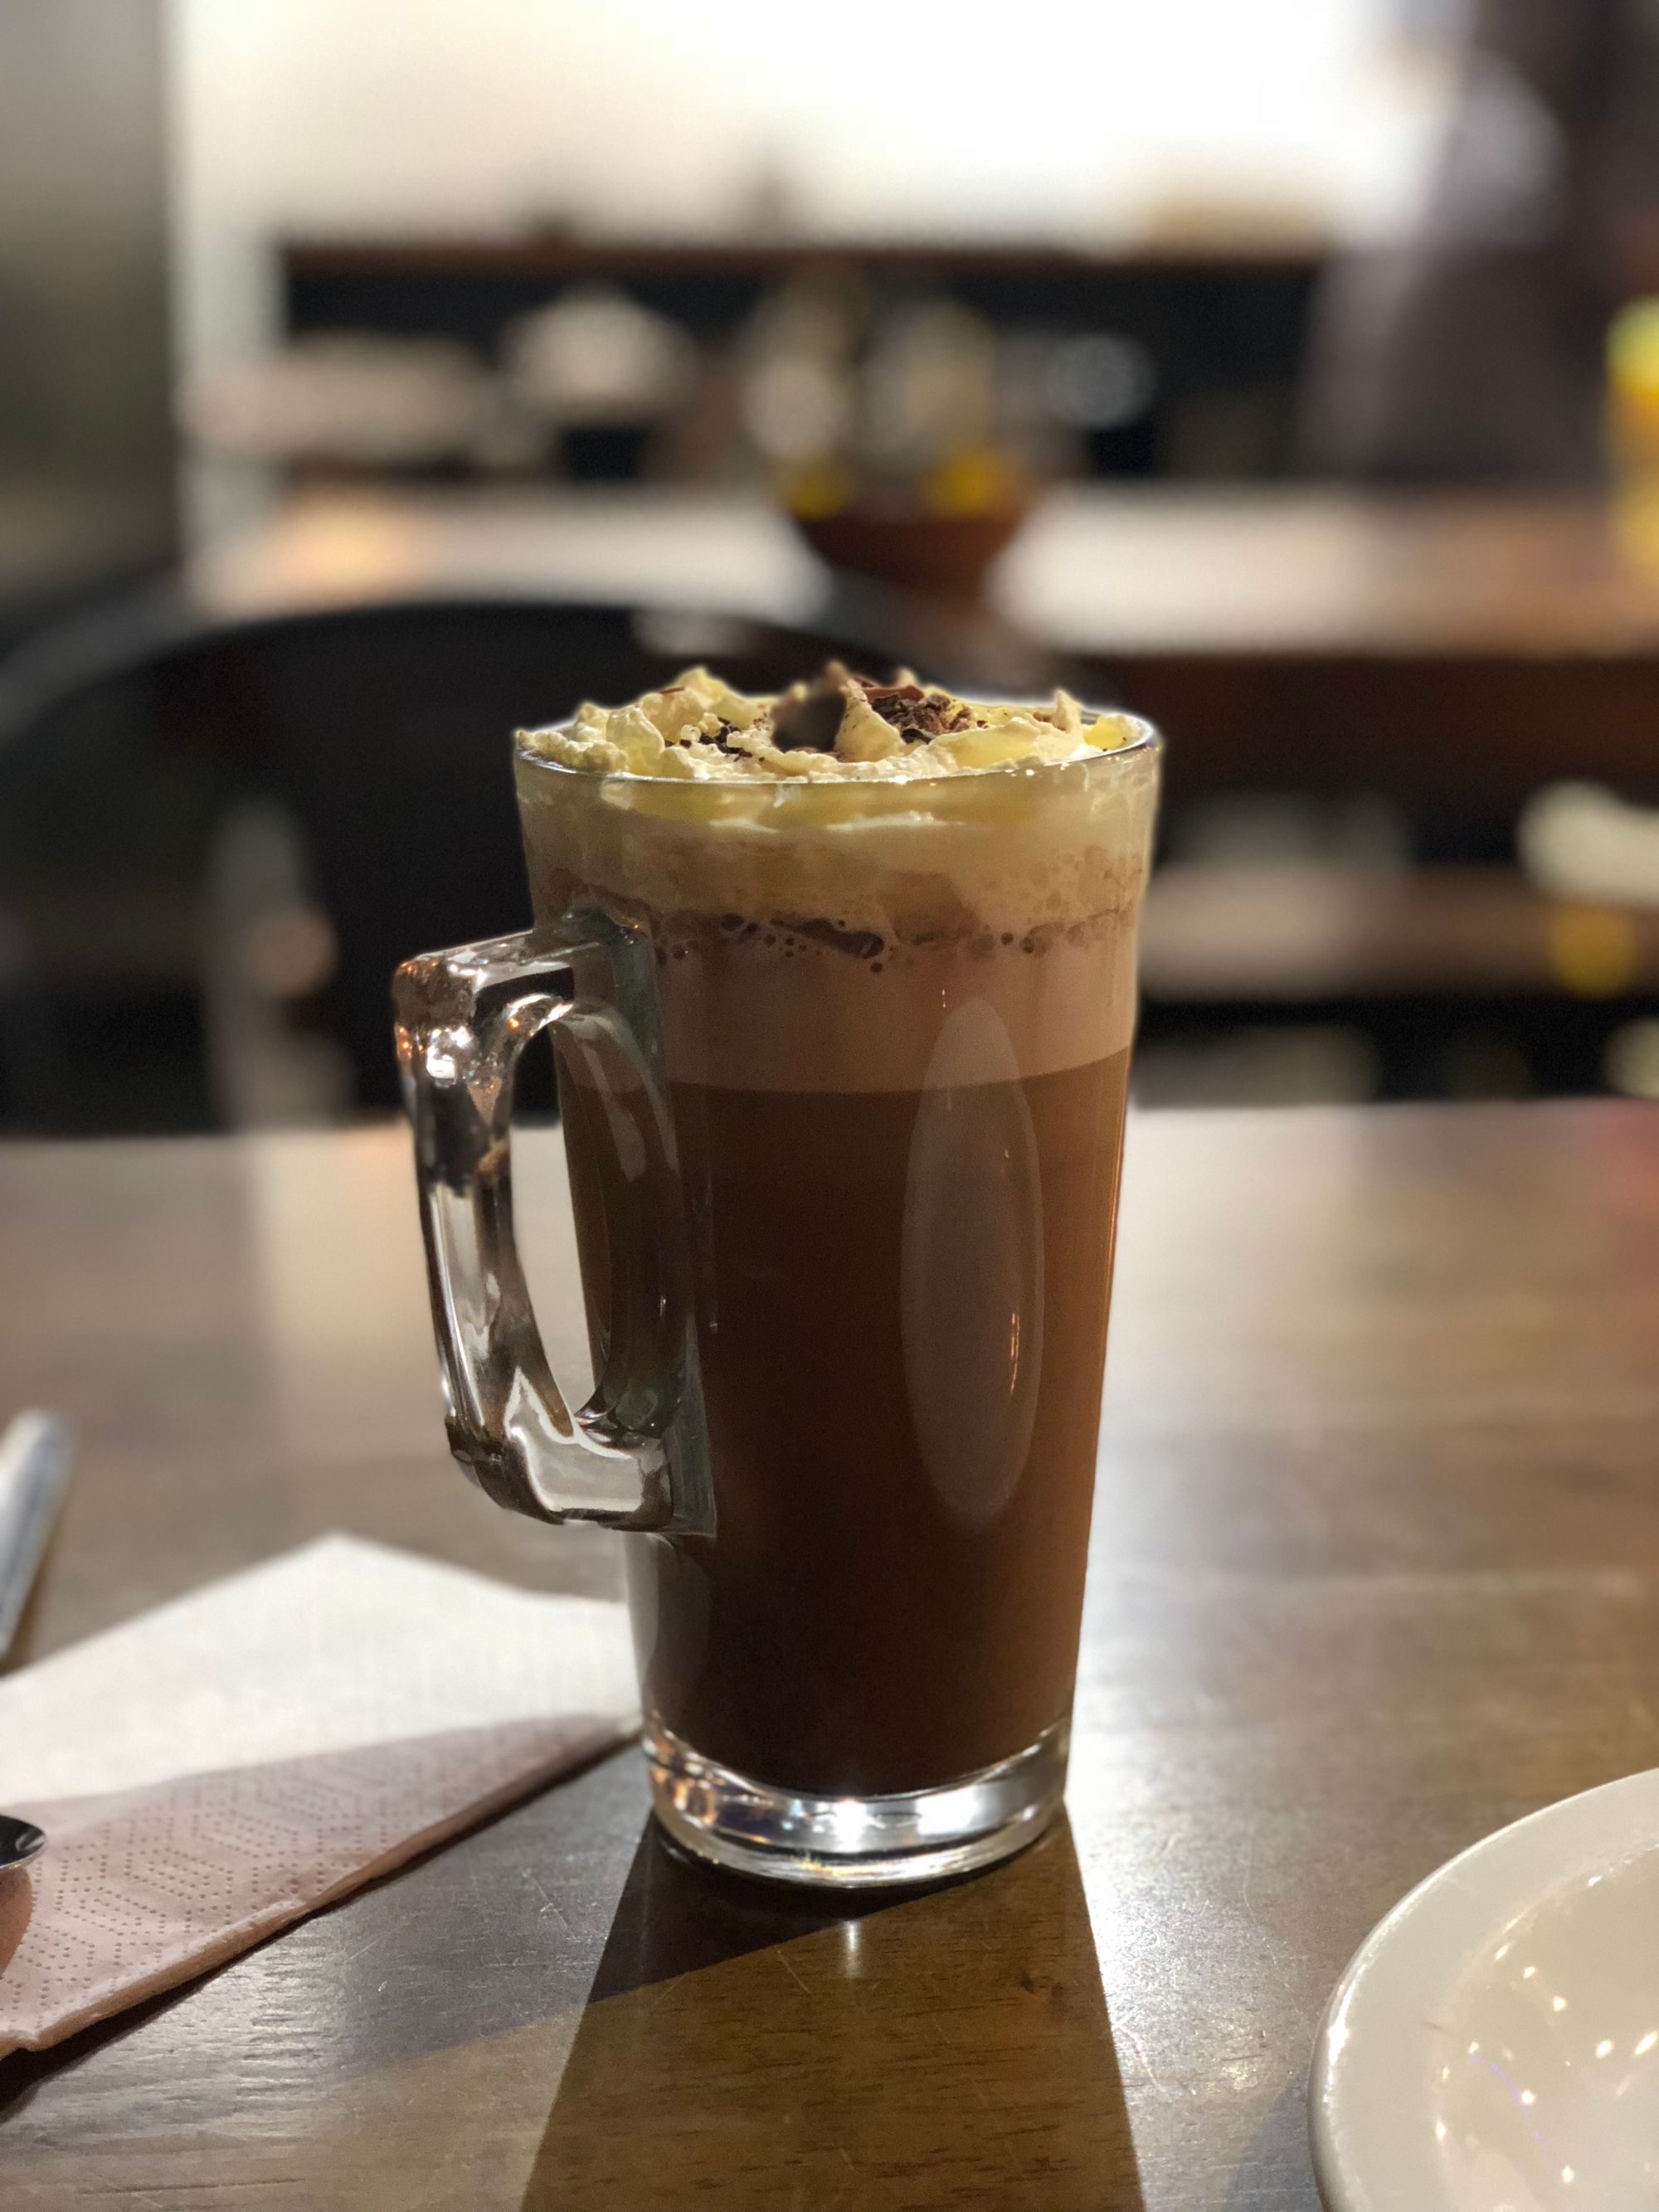 A full glass of coffee with a mocha-like drink, with cream and chocolate shavings on the top, in a coffee shop lit solely with artificial lighting.